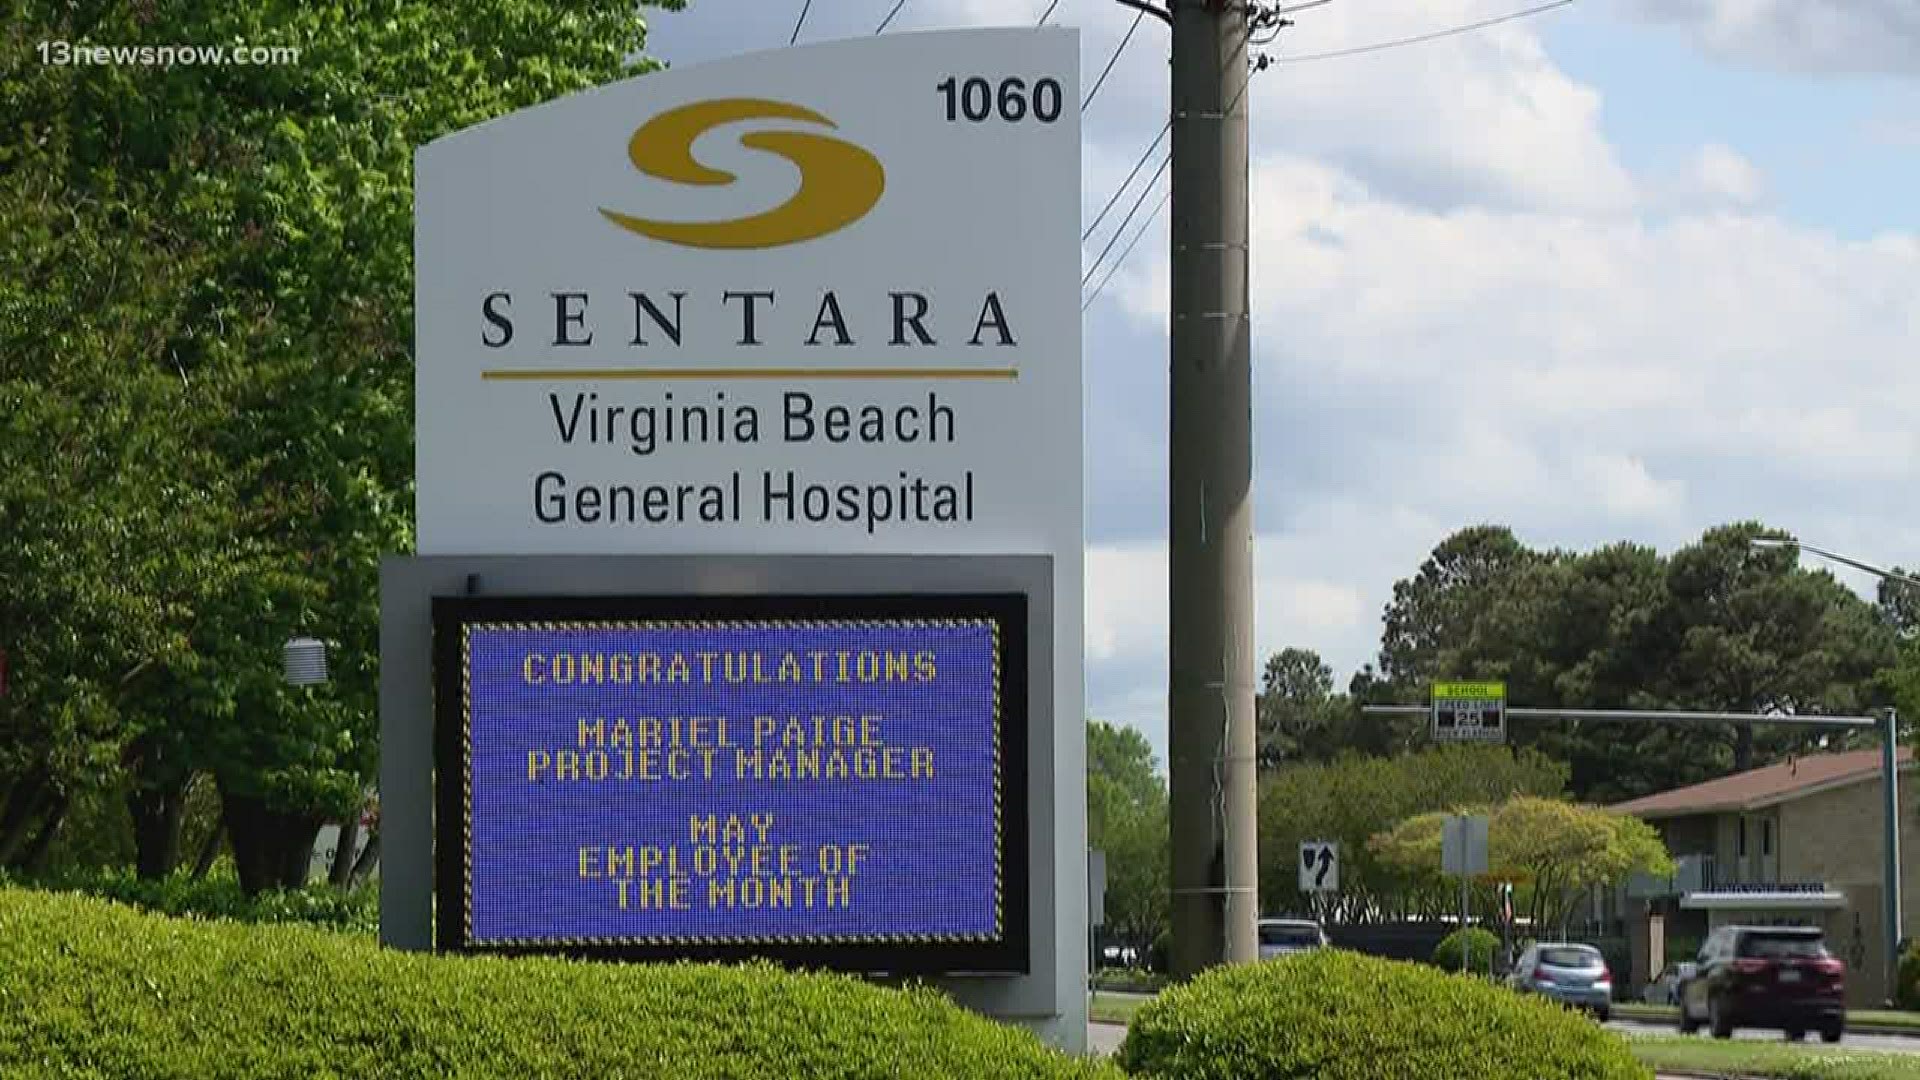 Sentara Healthcare said it was revising elements of the visitor policy which it tightened up in response to COVID-19.